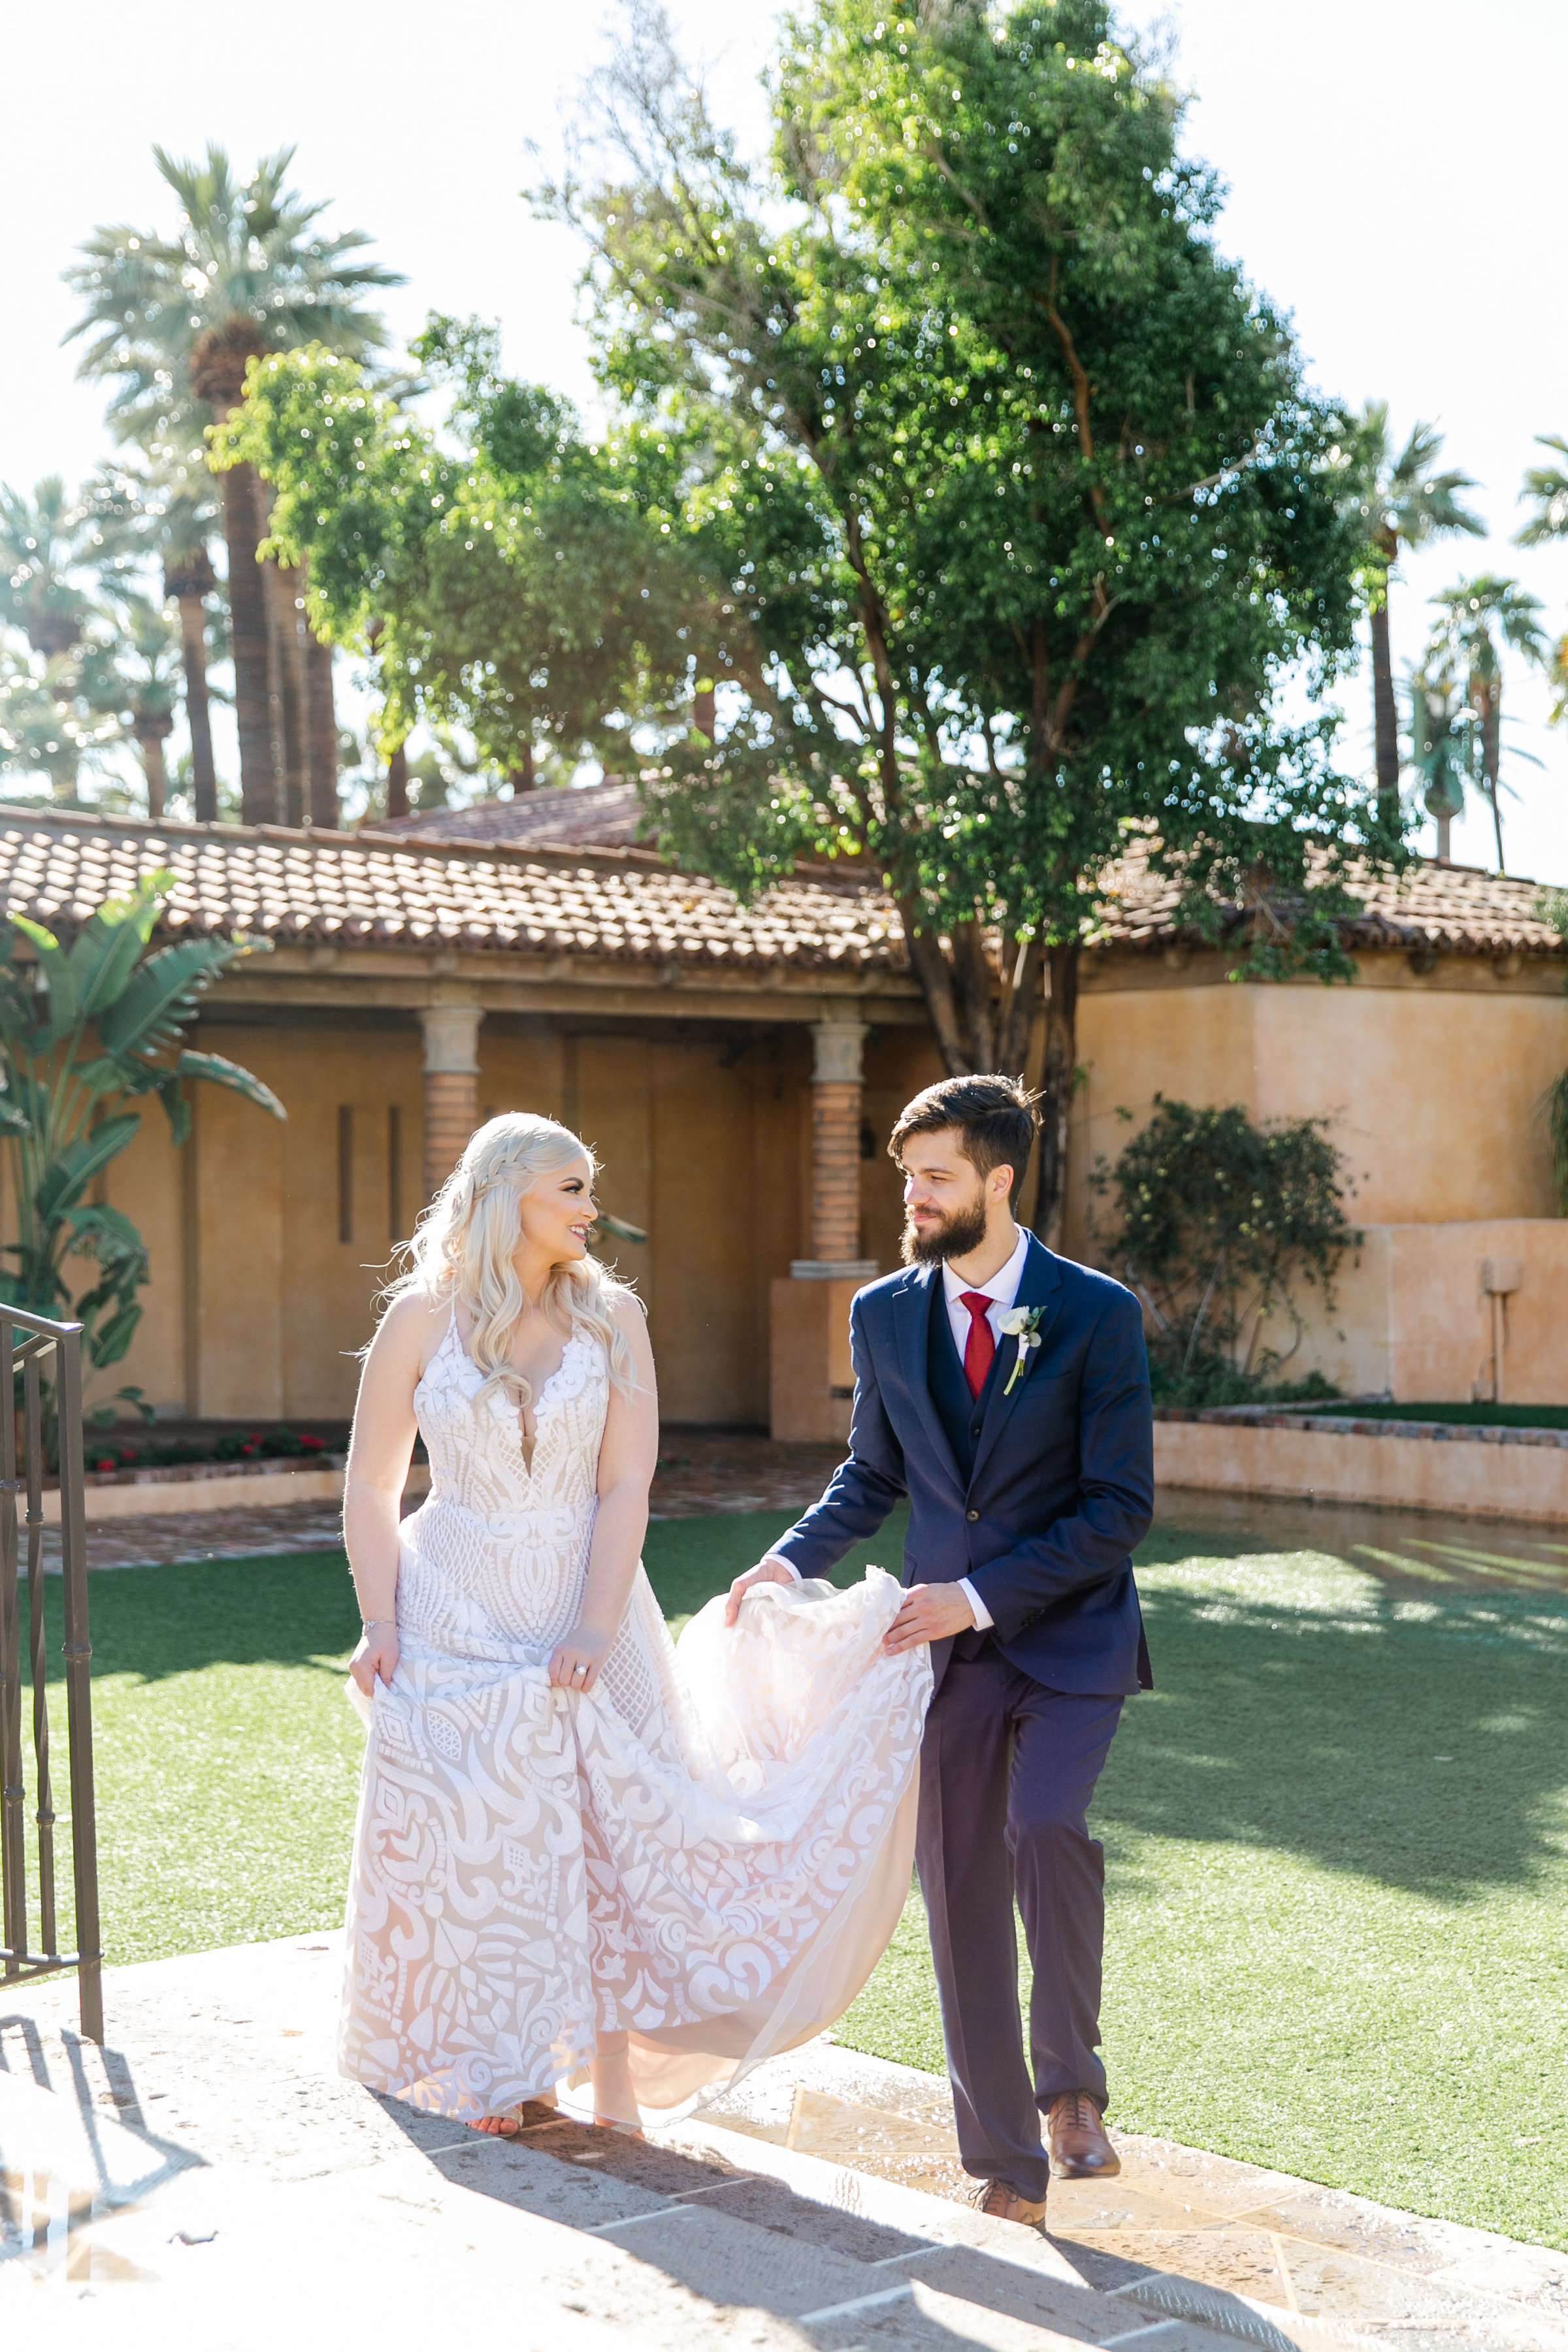 Karlie Colleen Photography - The Royal Palms Wedding - Some Like It Classic - Alex & Sam-172